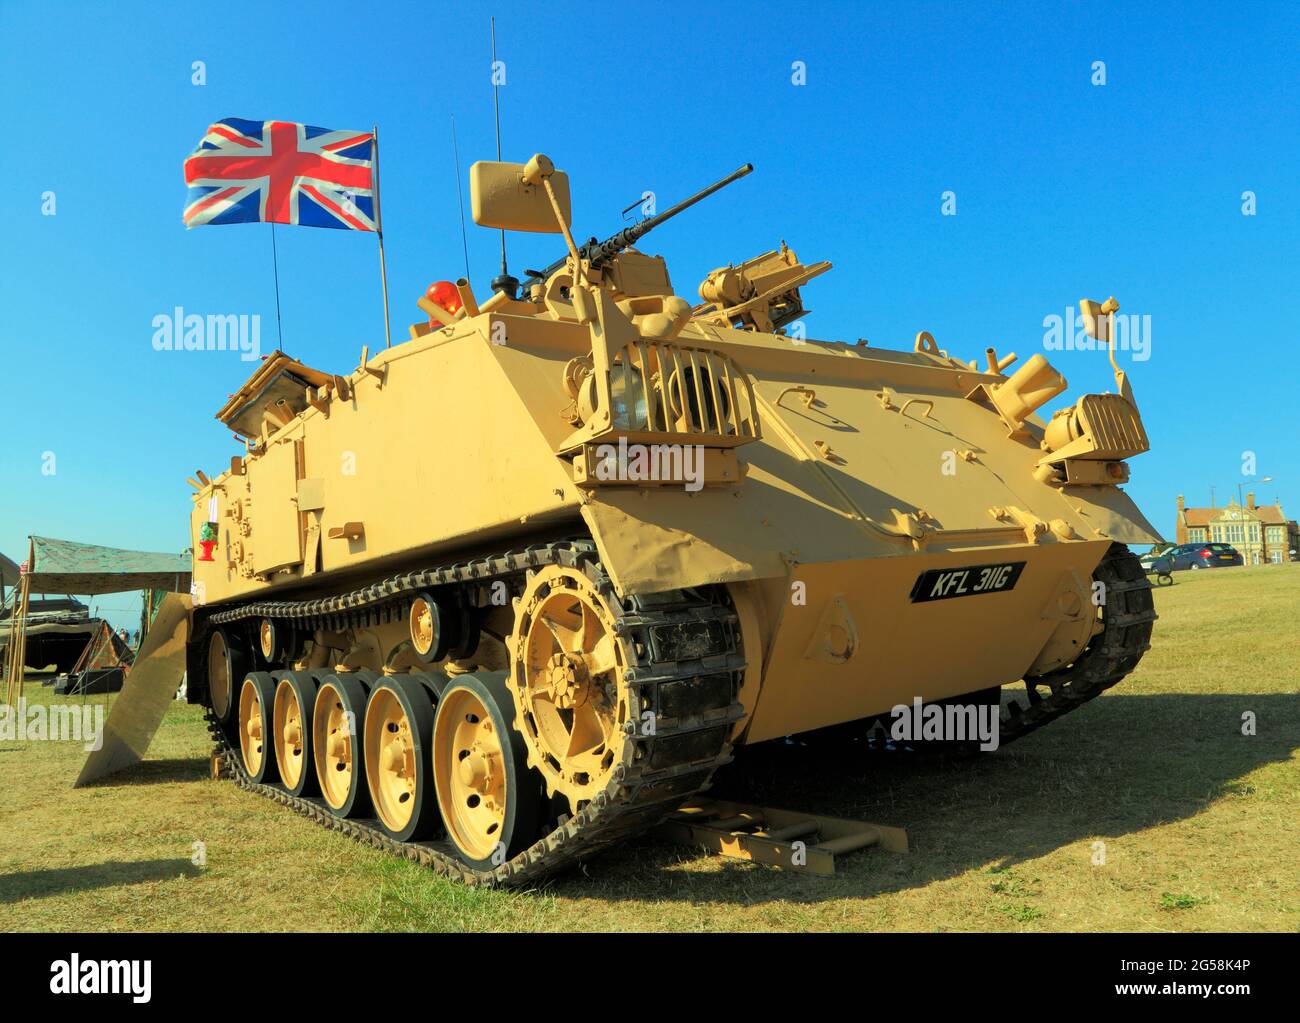 British 432 Tank, military vehicle, served in 1st Iraq War, conflict,vehicles, tanks, Union Jack flag Stock Photo